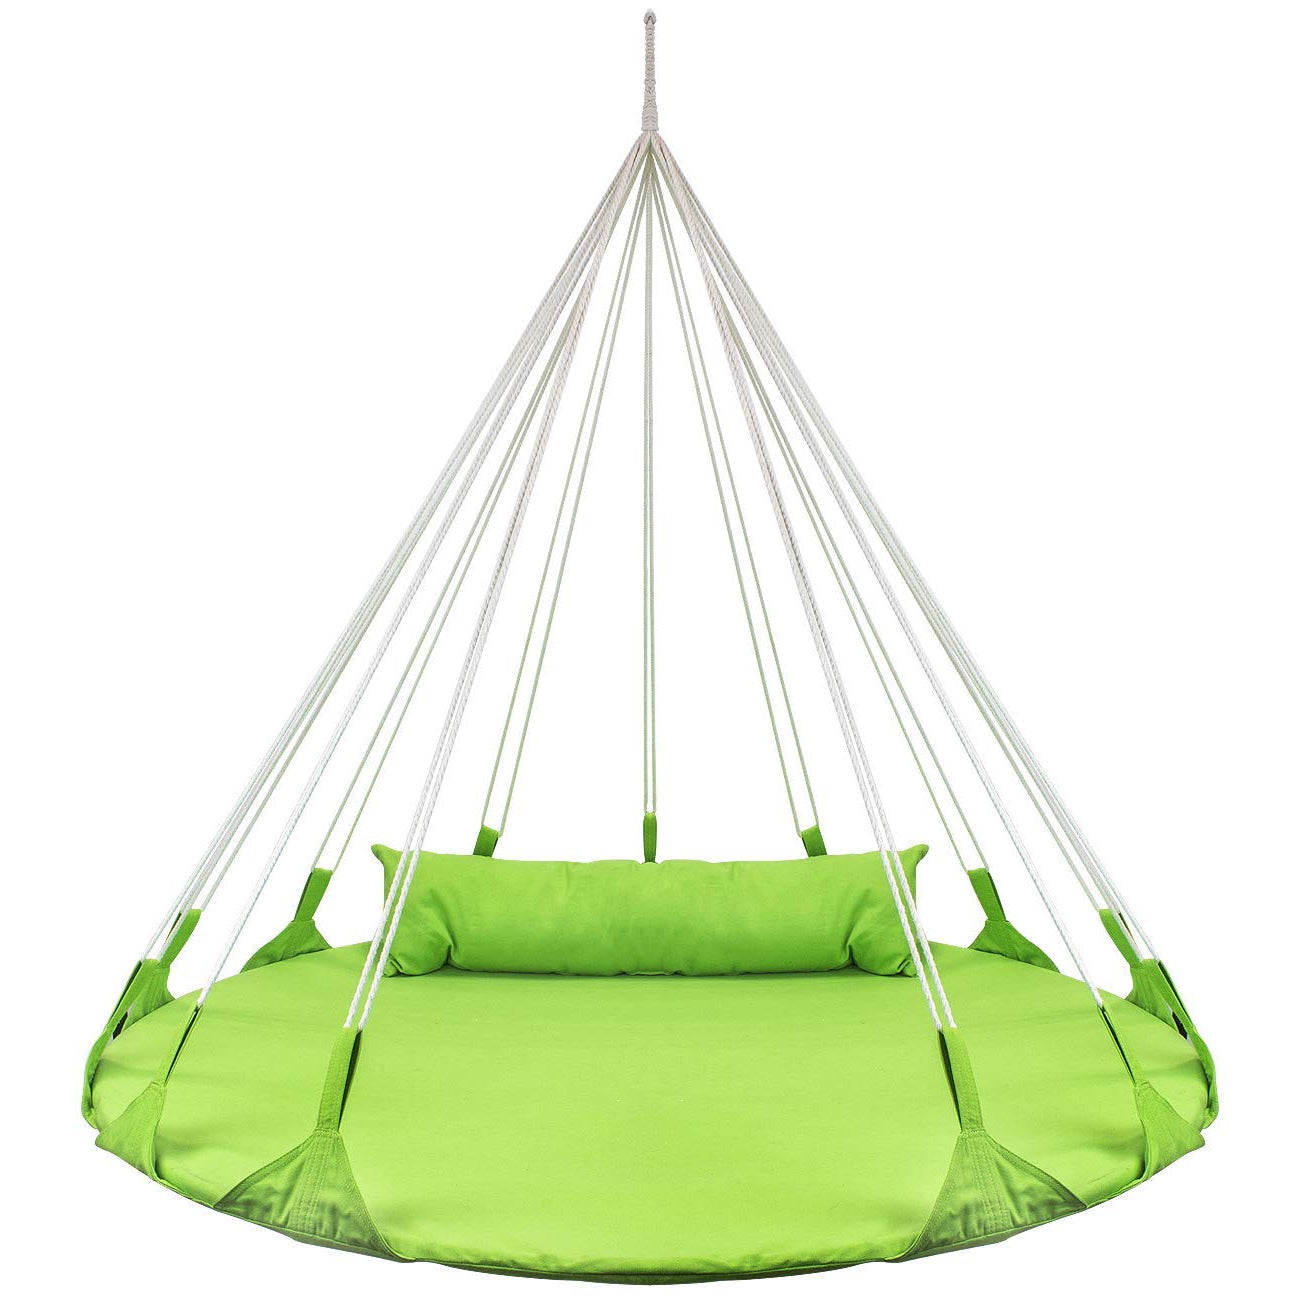 This Flying Saucer Hammock Chair Looks Like The Perfect Place To